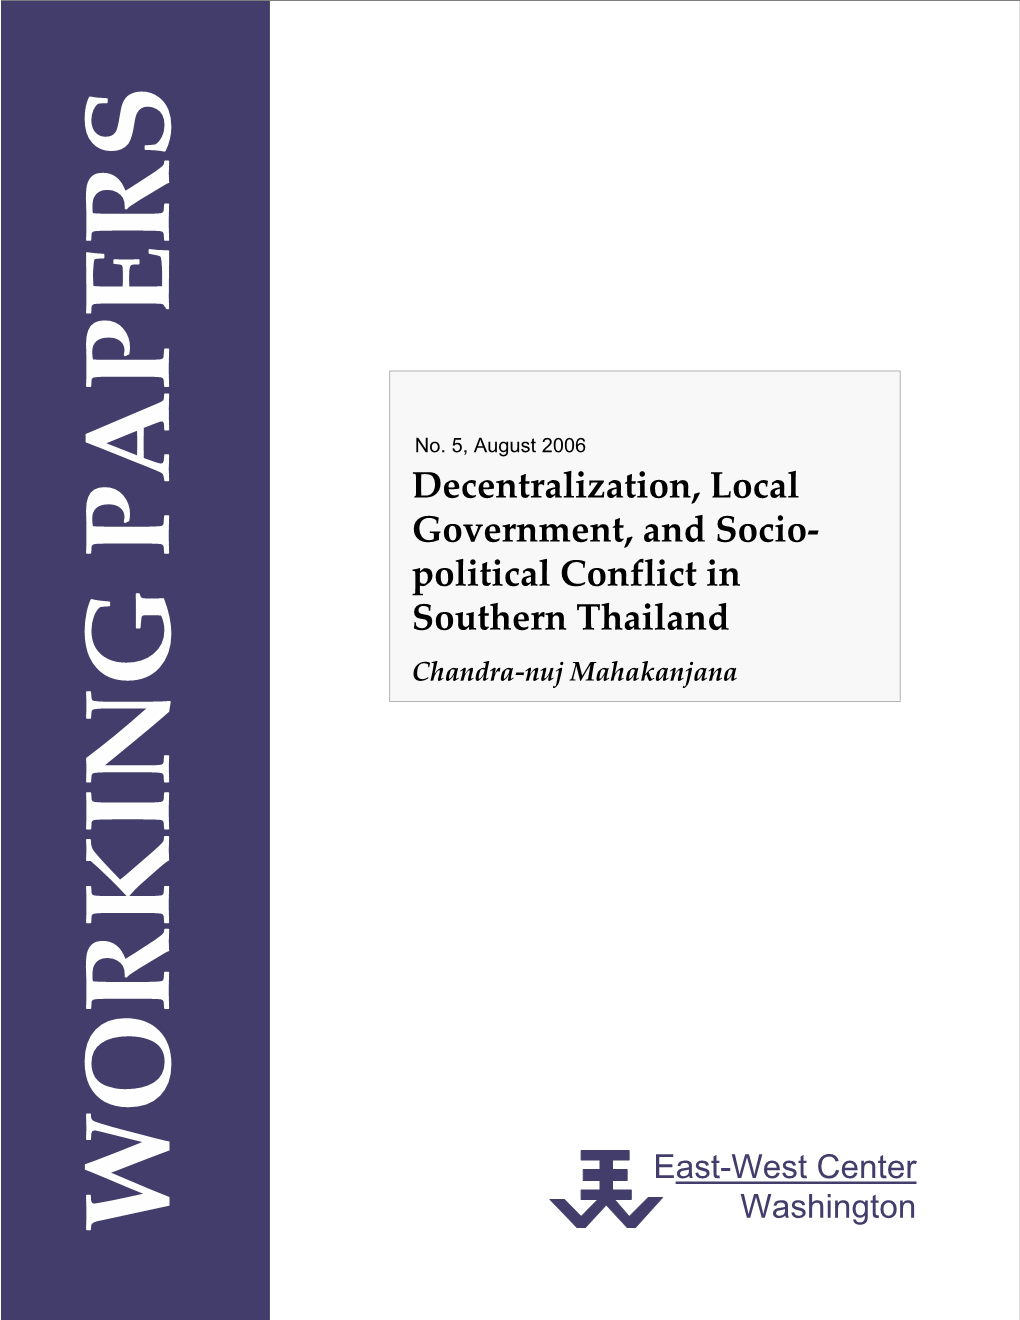 Decentralization, Local Government, and Socio-Political Conflict in Southern Thailand